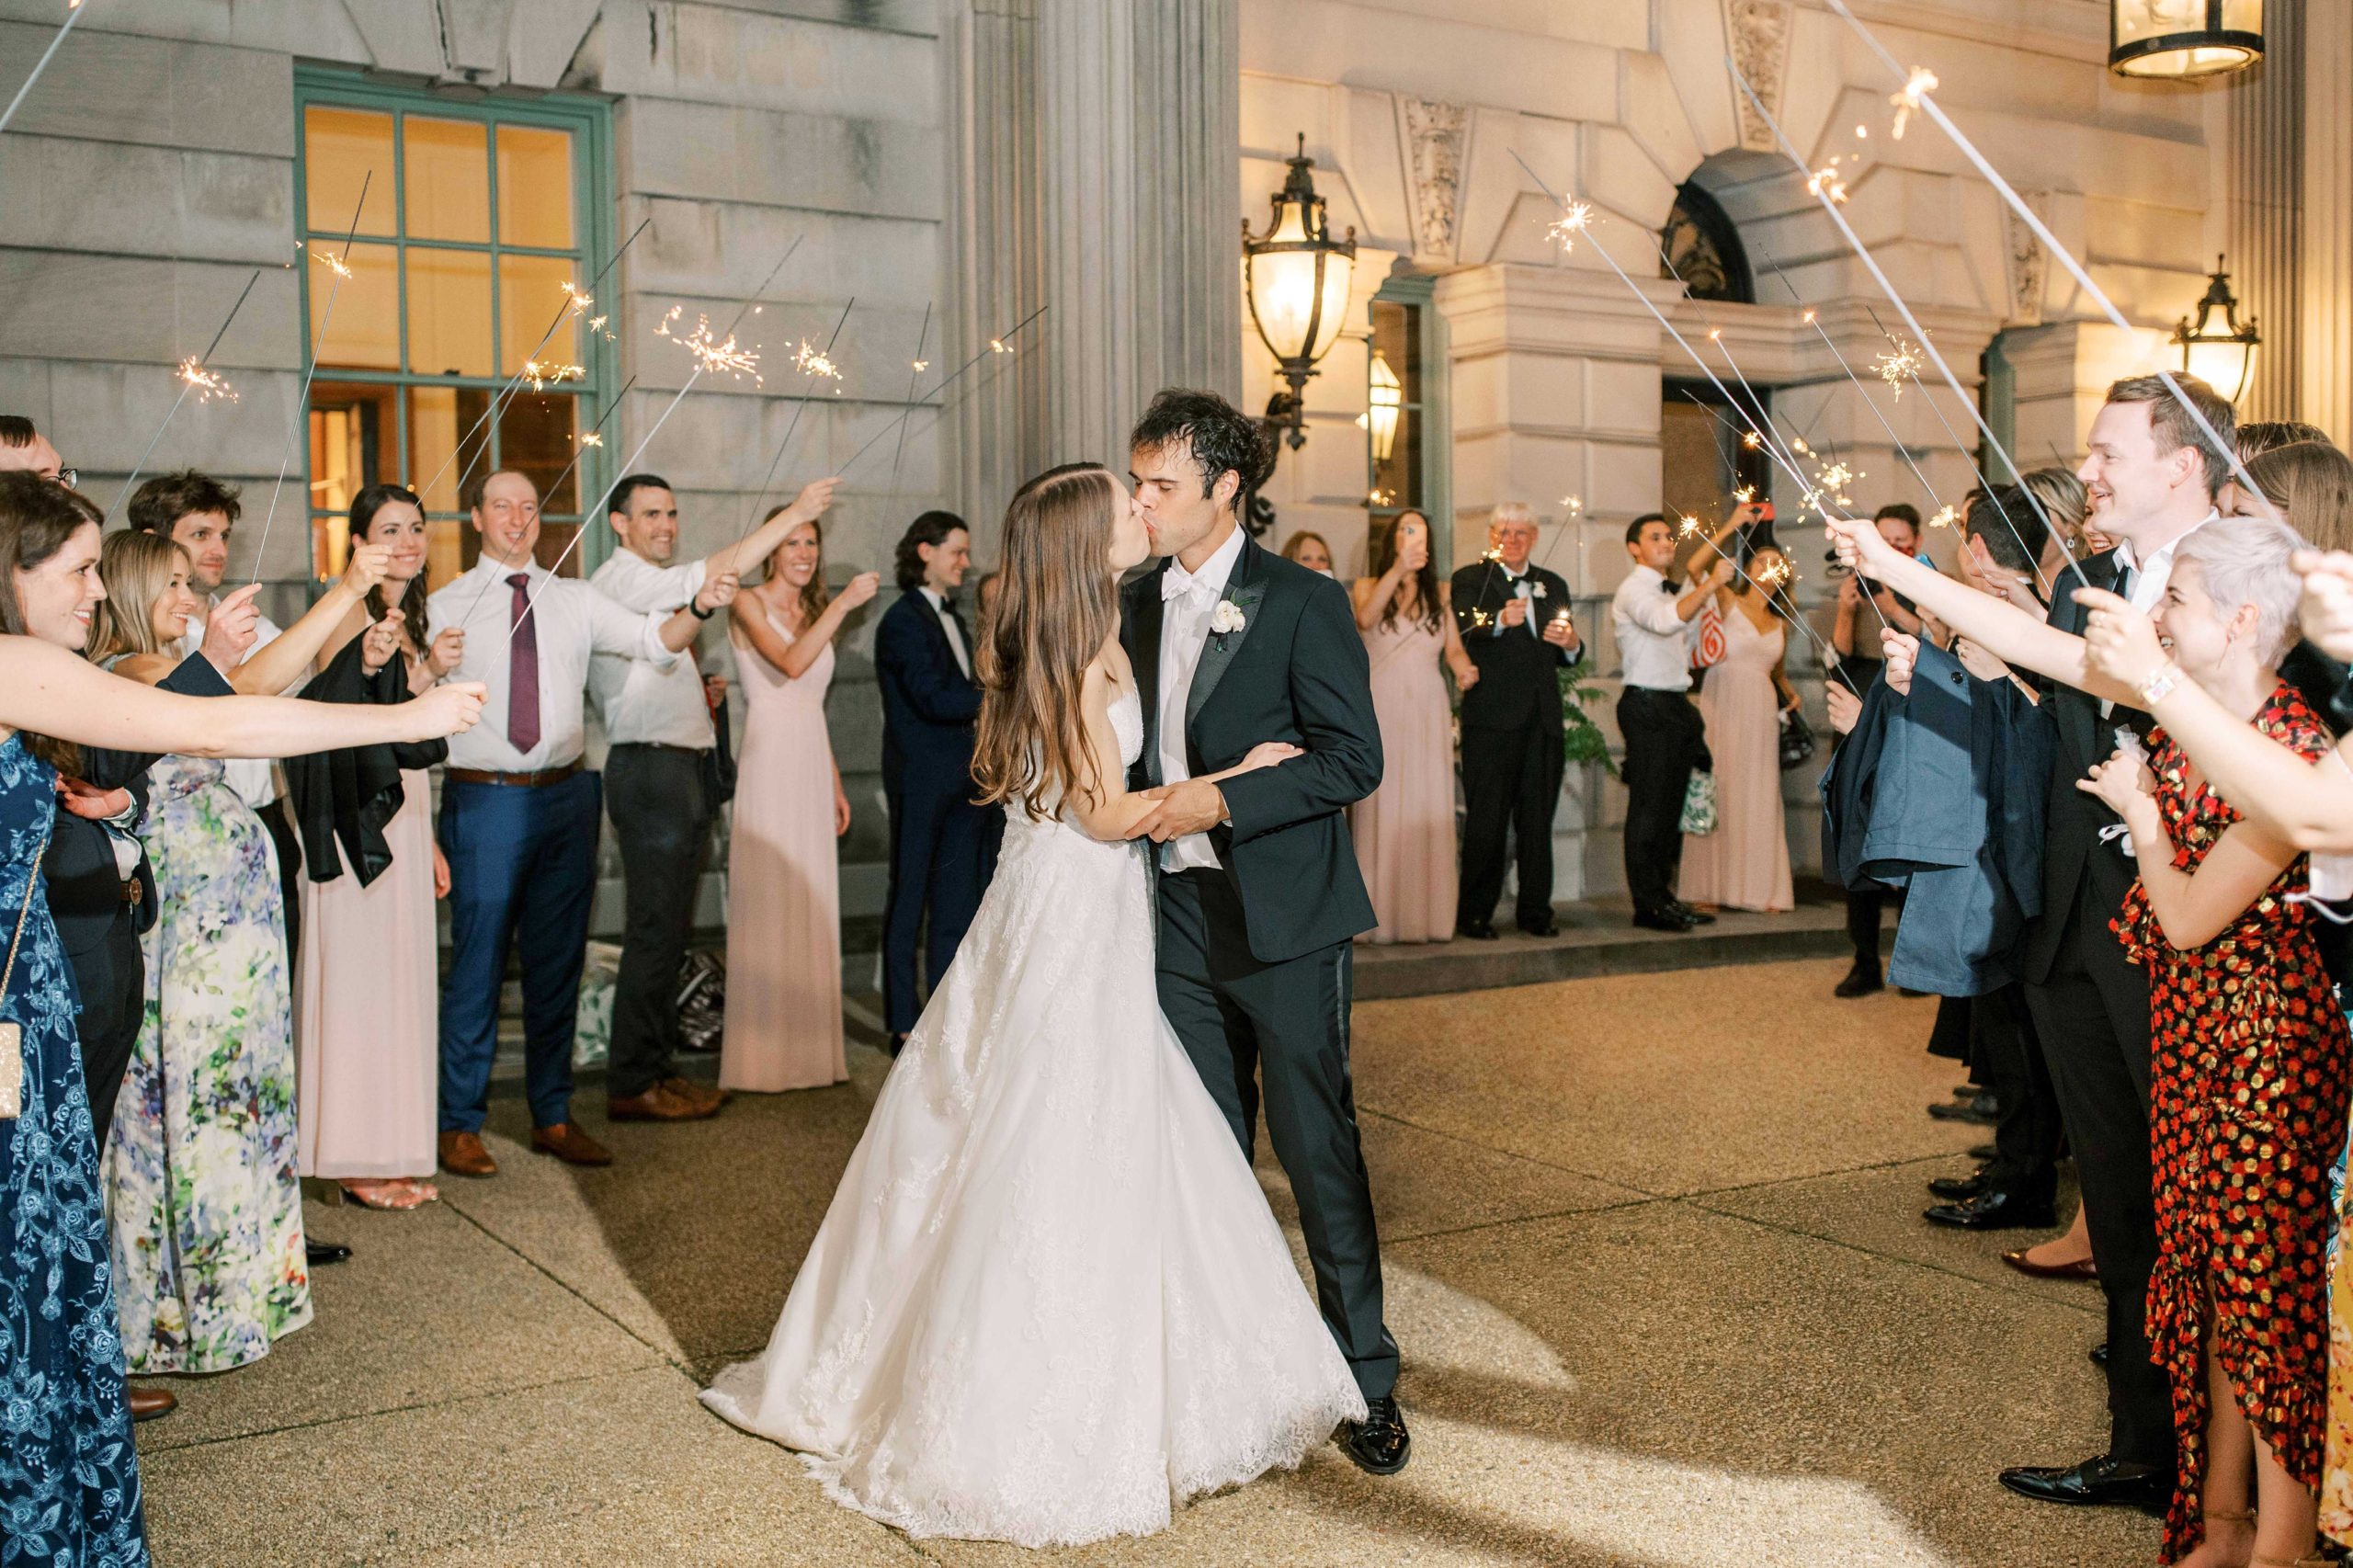 A stunning garden ceremony and ballroom reception from an Anderson House wedding in Washington, DC.